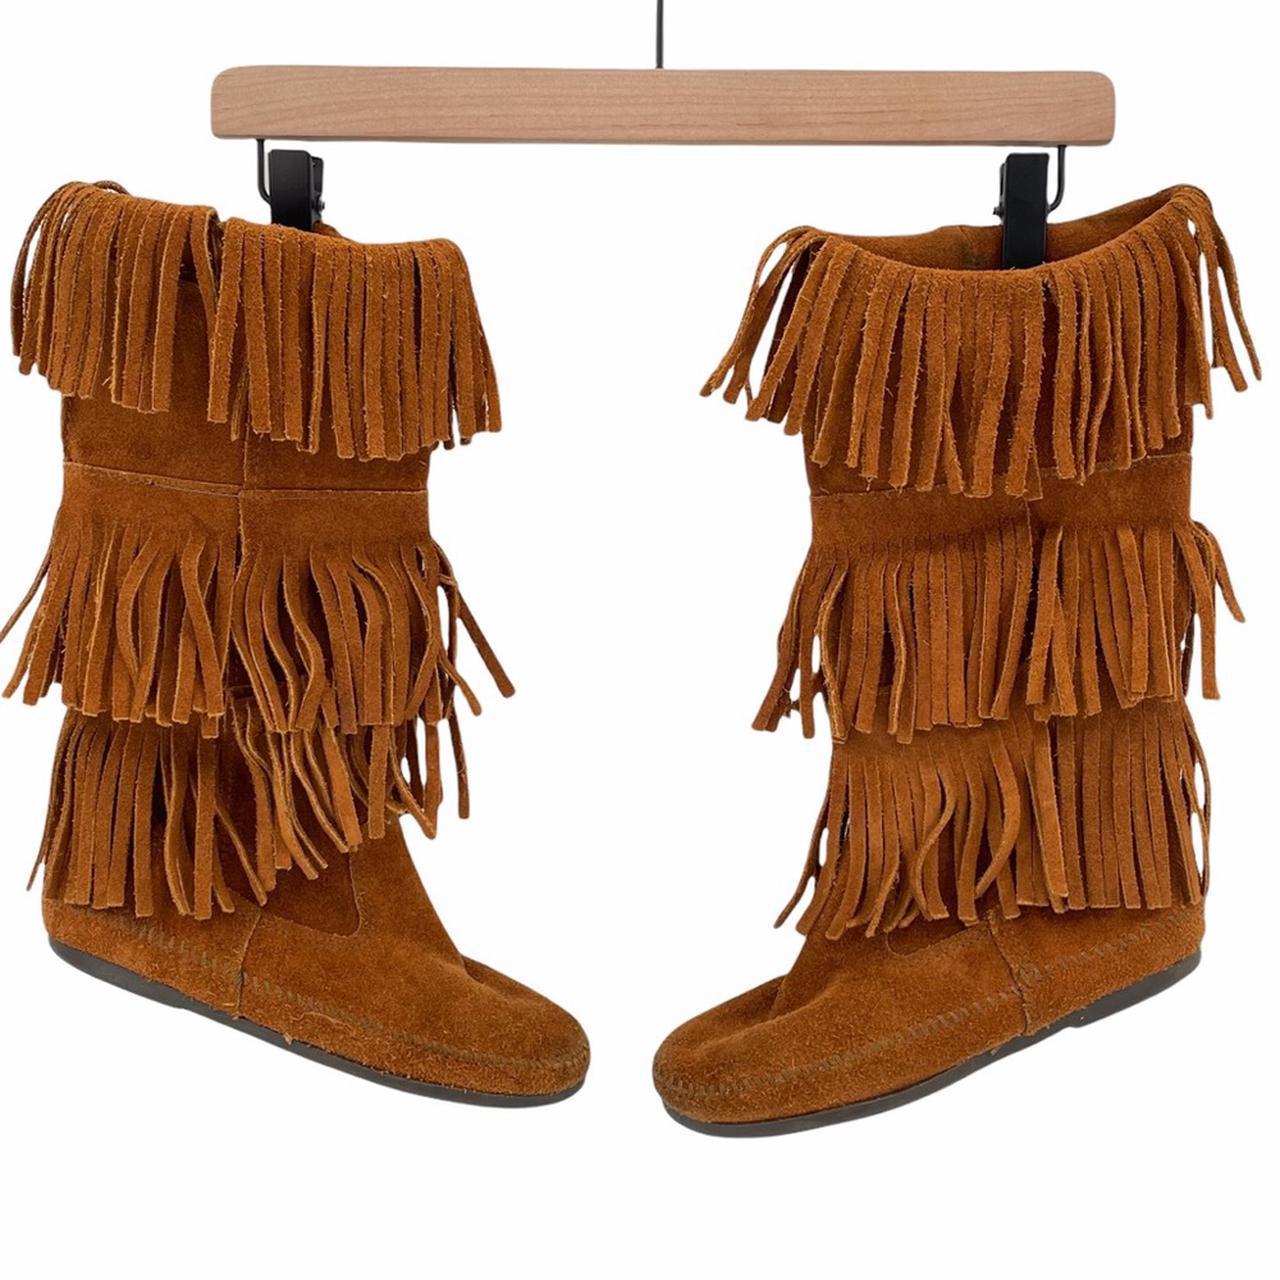 Product Image 1 - Minnetonka high moccasin boots in